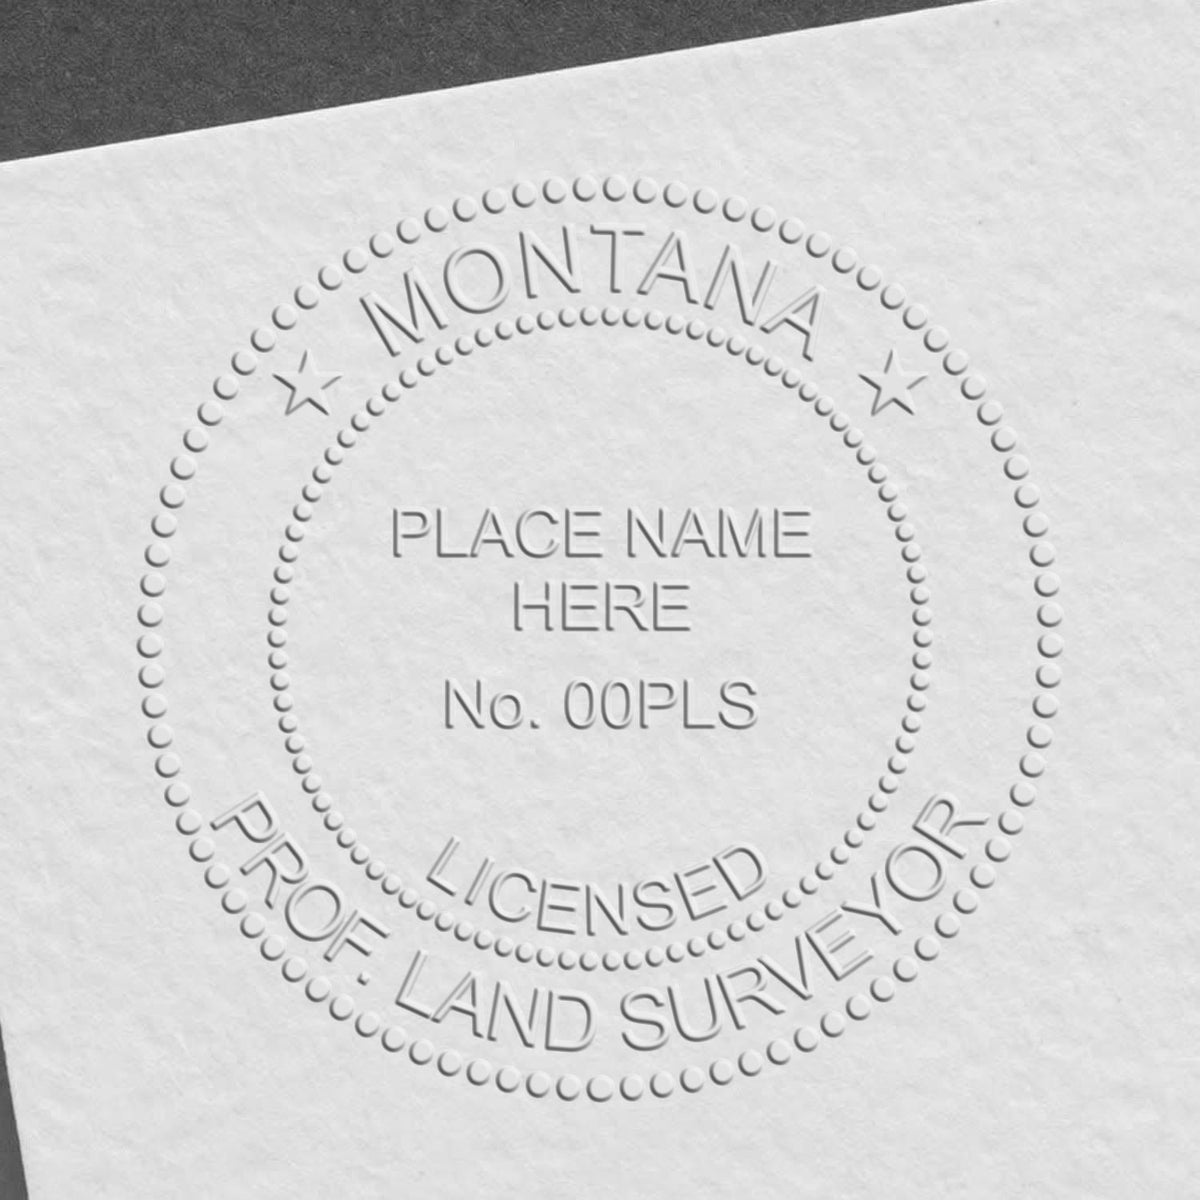 A lifestyle photo showing a stamped image of the Handheld Montana Land Surveyor Seal on a piece of paper